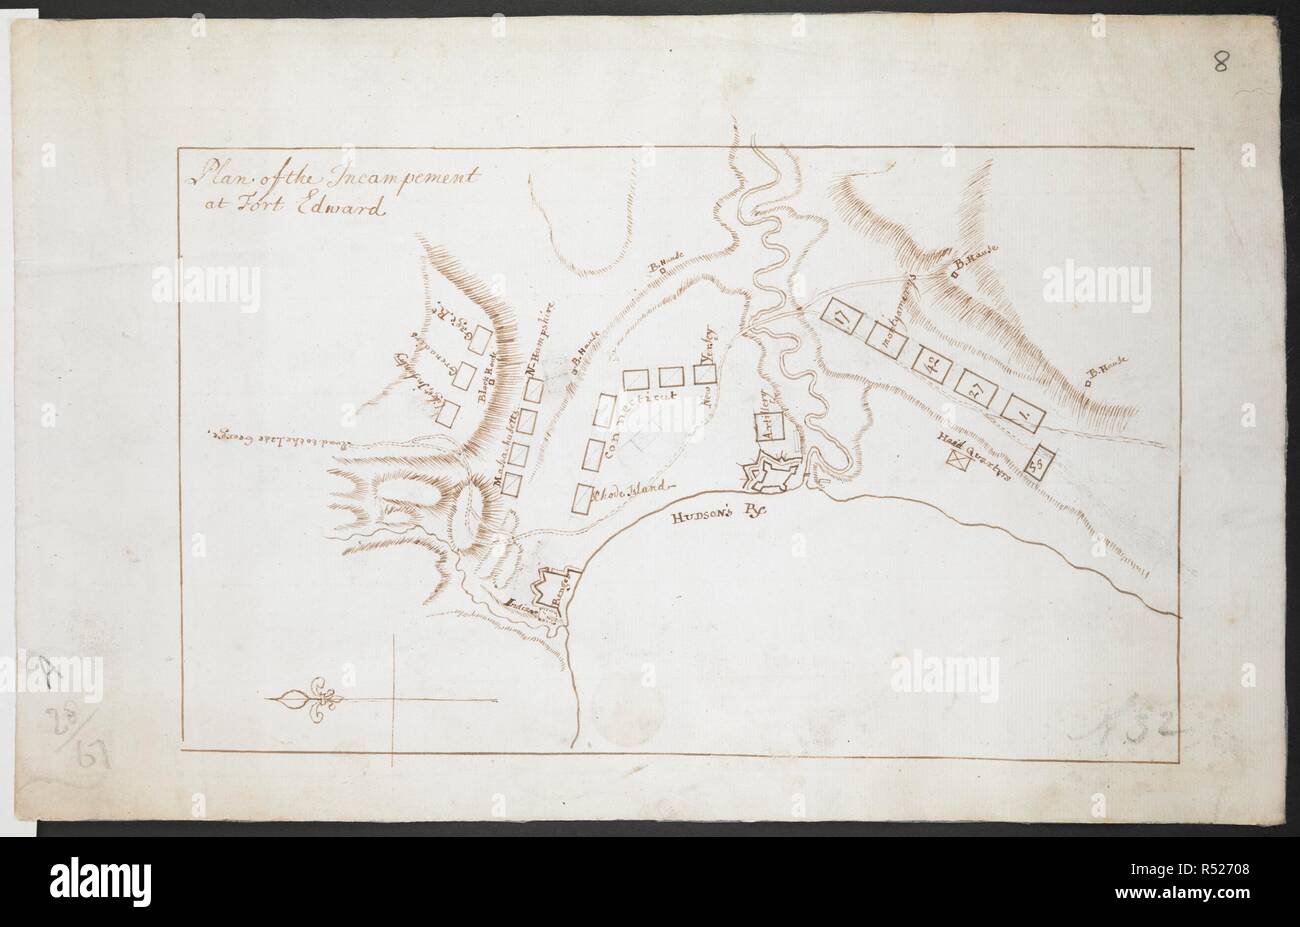 Plan of the incampement of Fort Edward', possibly by Thomas Sowers. . R.U.S.I. MAPS. Vol. LXXVI (1-13). 57711 (1-4). Places in states North-East of New York. 18th century. circa 1759 . Map oriented with East at top. Ink on paper. 160 x 260mm. No scale given. Source: Add. 57711.8 Amherst no. A 32. R.U.S.I. no. A 28.67. Stock Photo